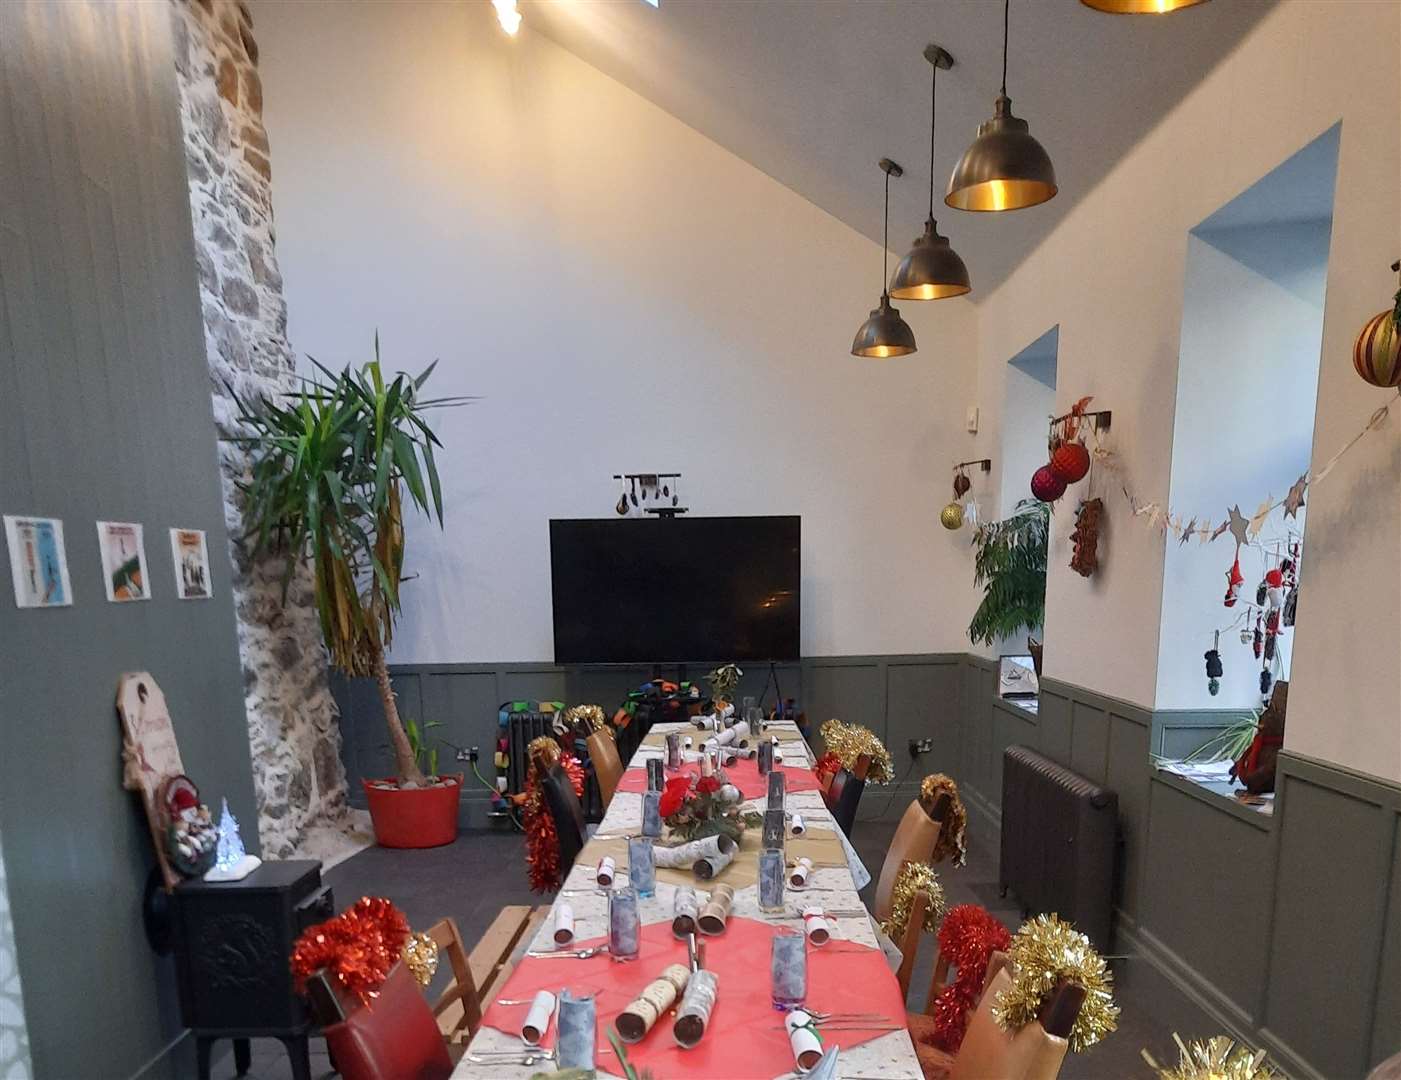 People in the community were able to enjoy a meal on Christmas Day at the venue.